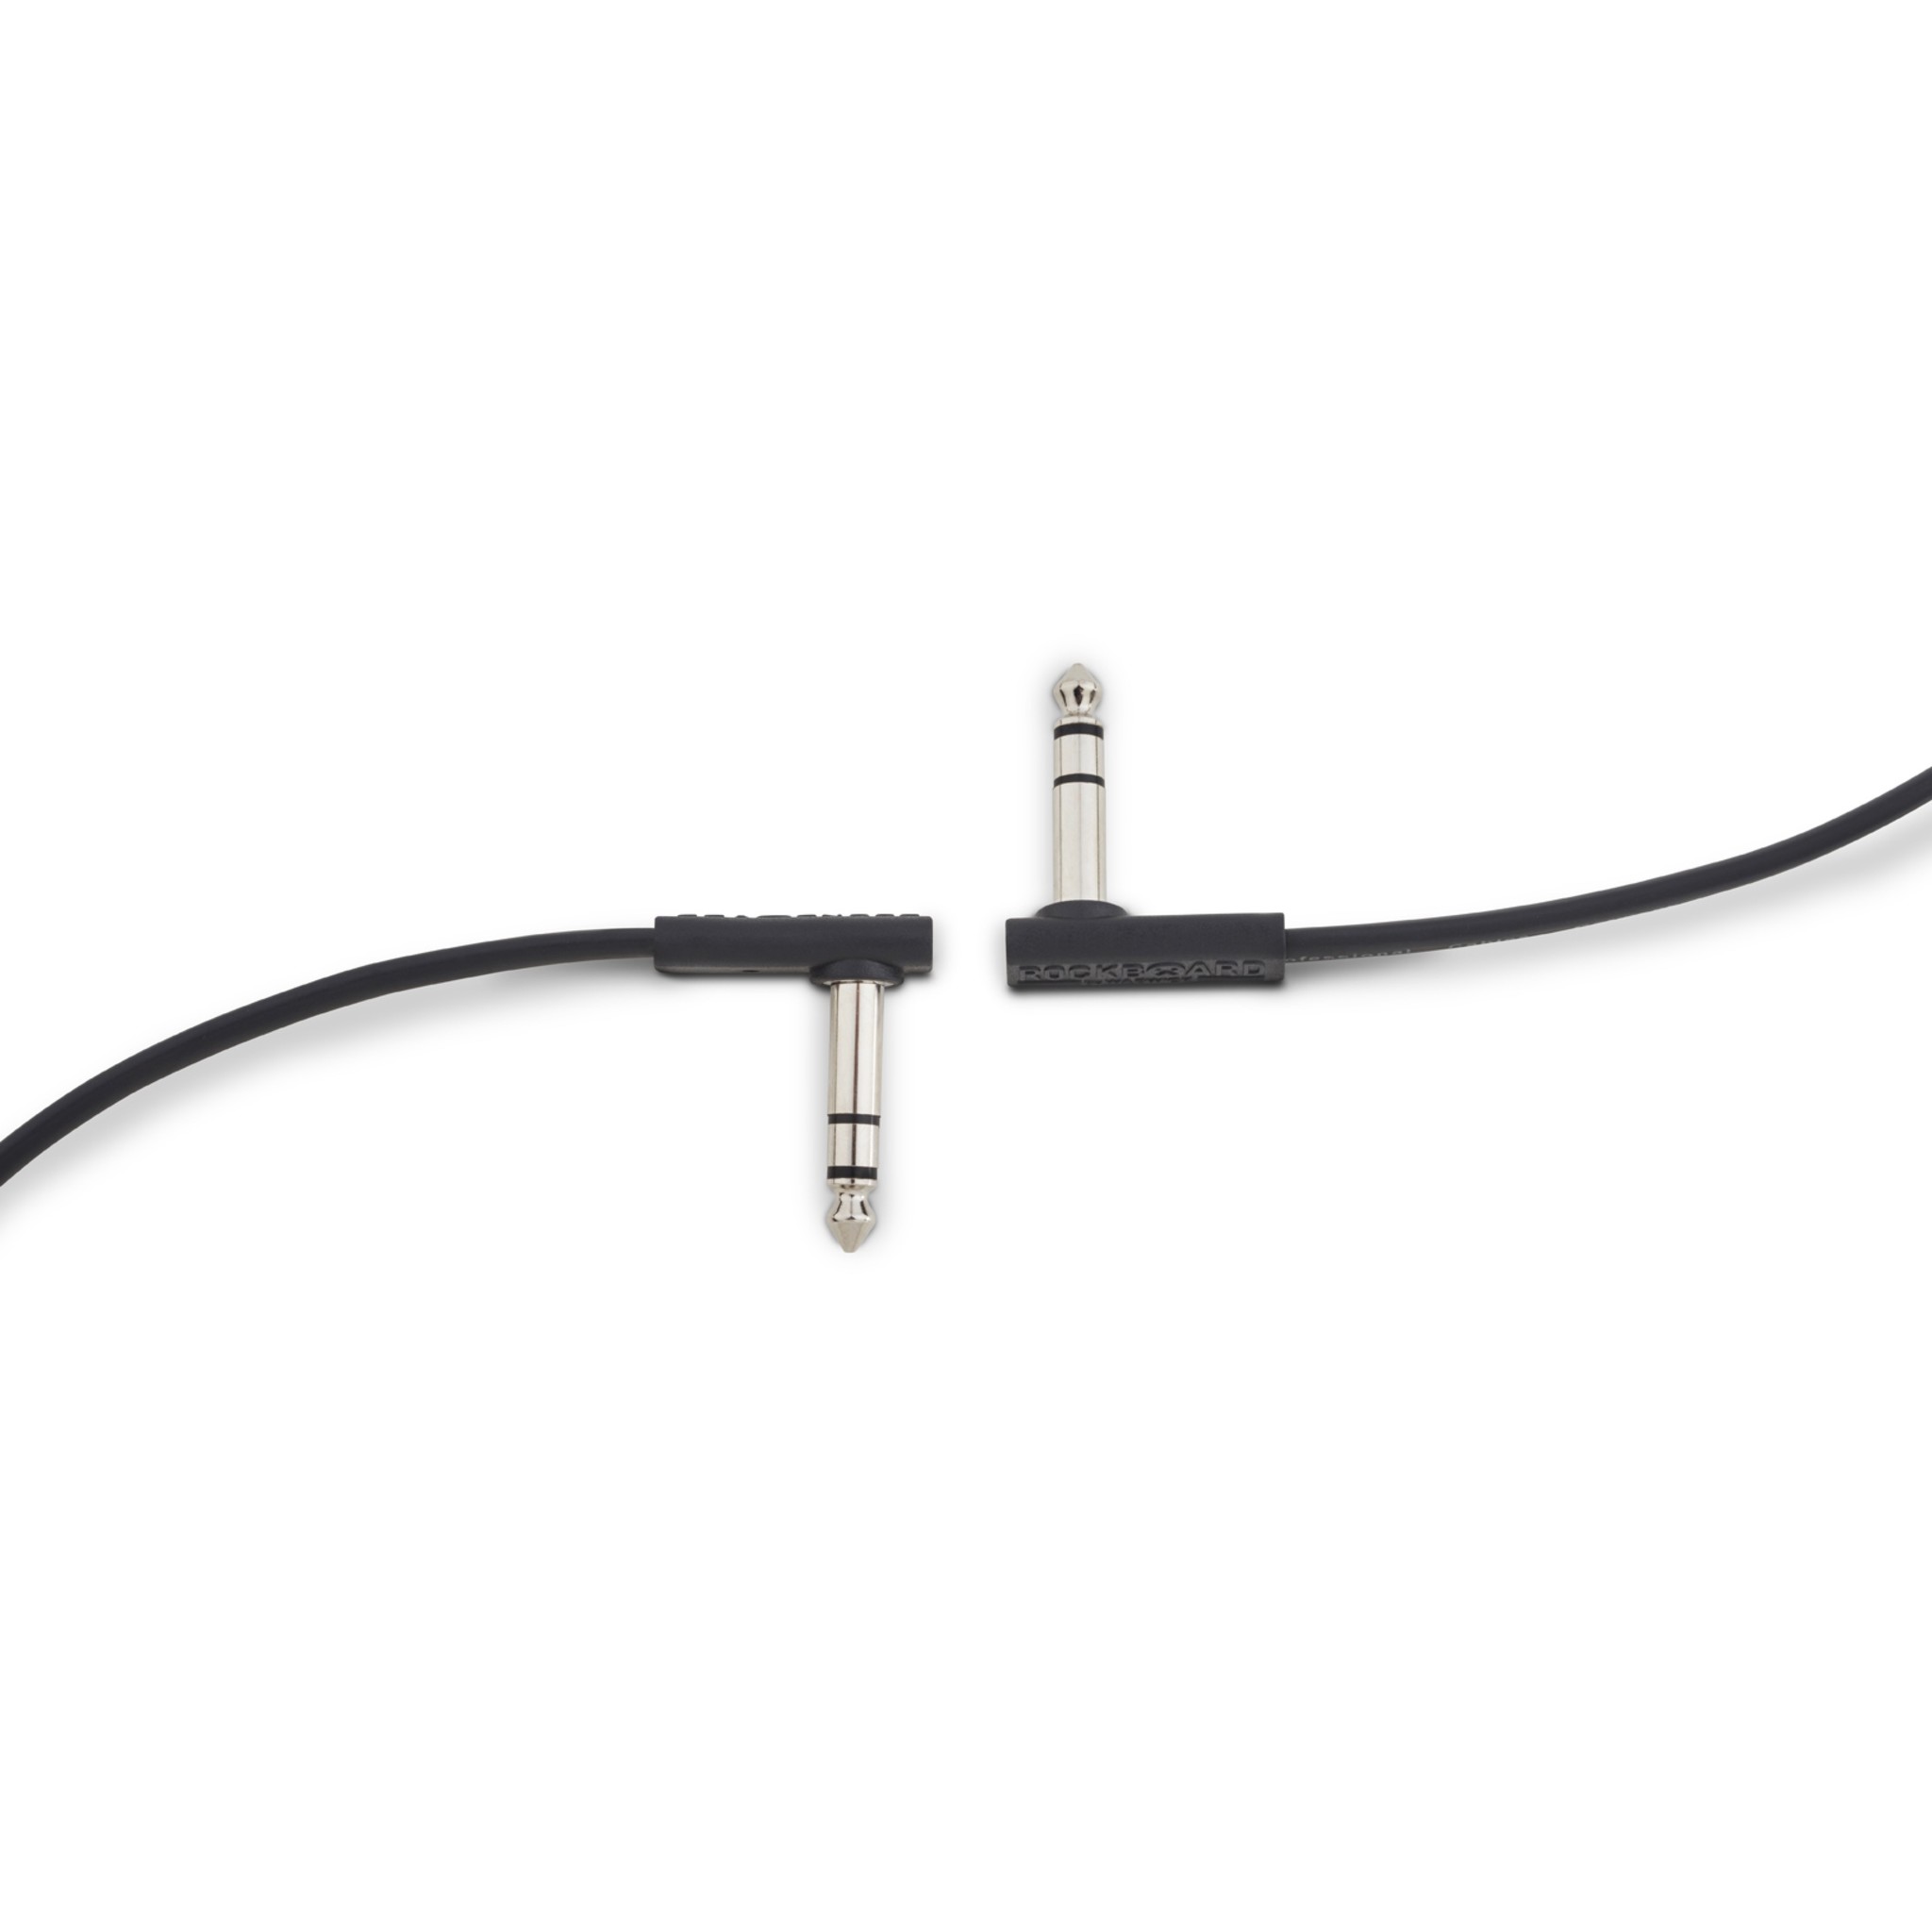 Rockboard Flat Patch TRS Cable, 120 cm / 3.93 ft, Black, low profile, for switch & expression pedals